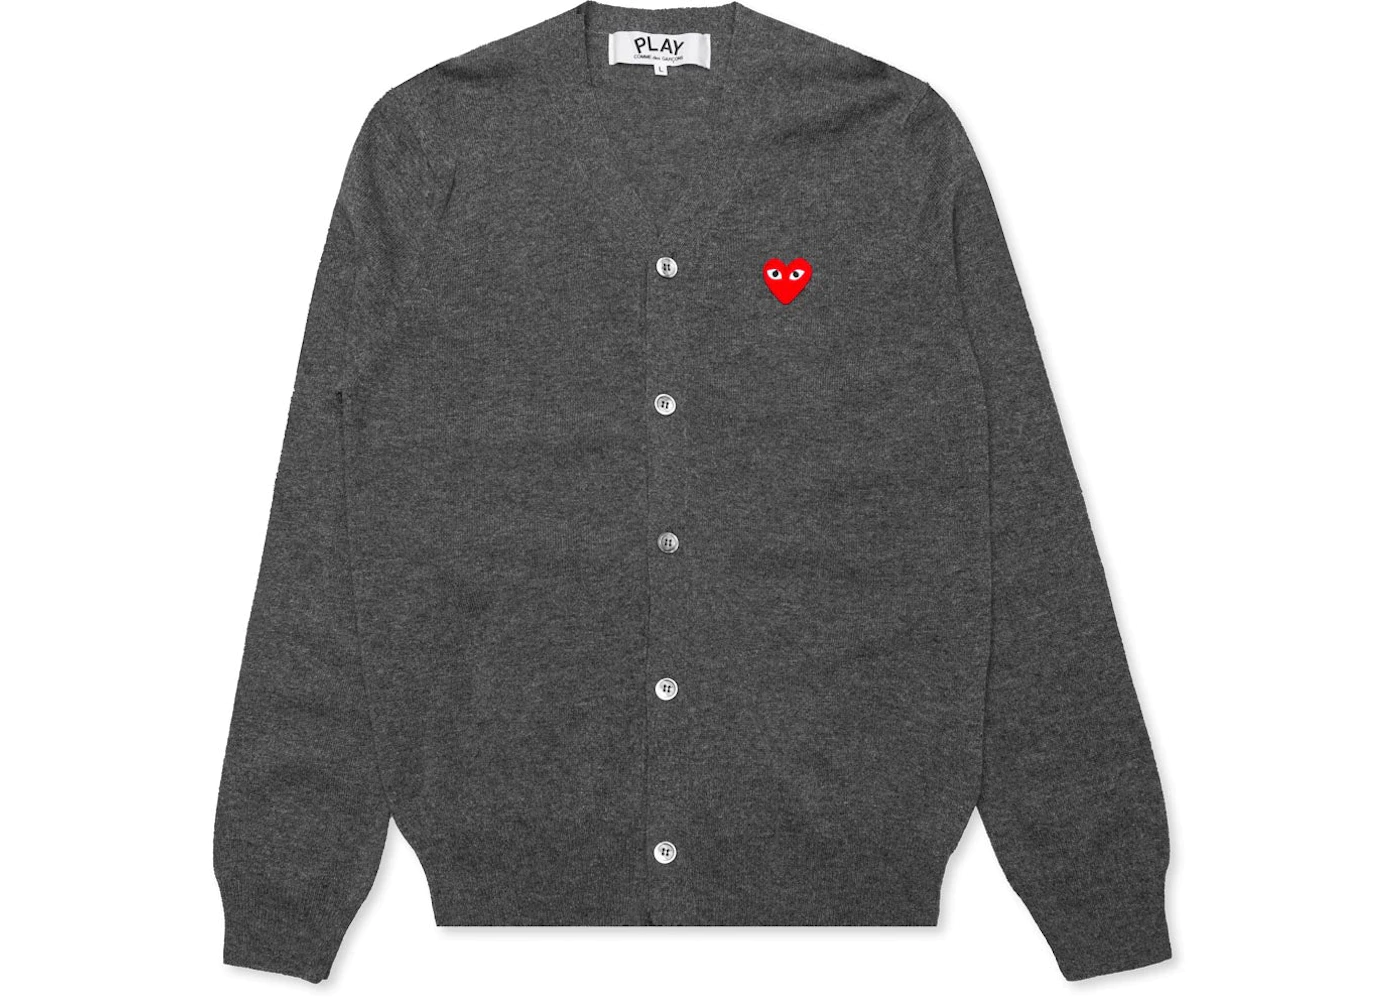 Comme des Garcons Red Heart Knit Sweater Grey Men's - US